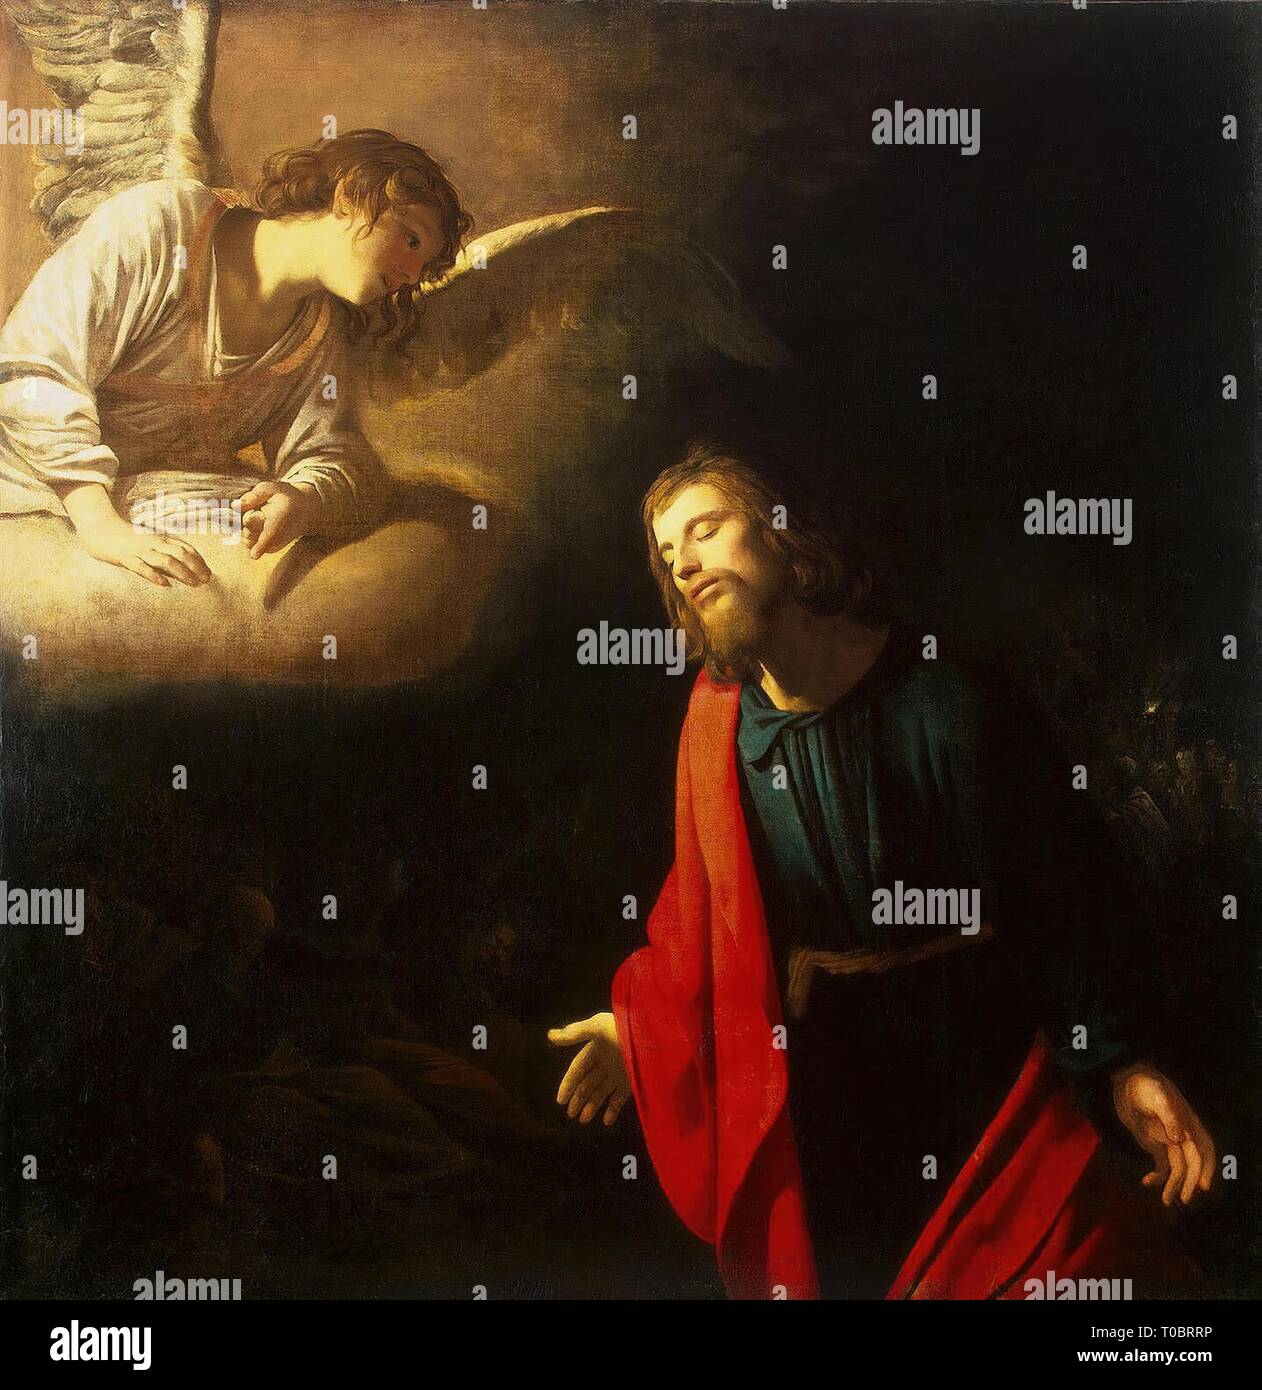 'Christ in the Garden of Gethsemane (The Agony in the Garden)'. Holland, Circa 1617. Dimensions: 113x110 cm. Museum: State Hermitage, St. Petersburg. Author: GERRIT VAN HONTHORST. Stock Photo